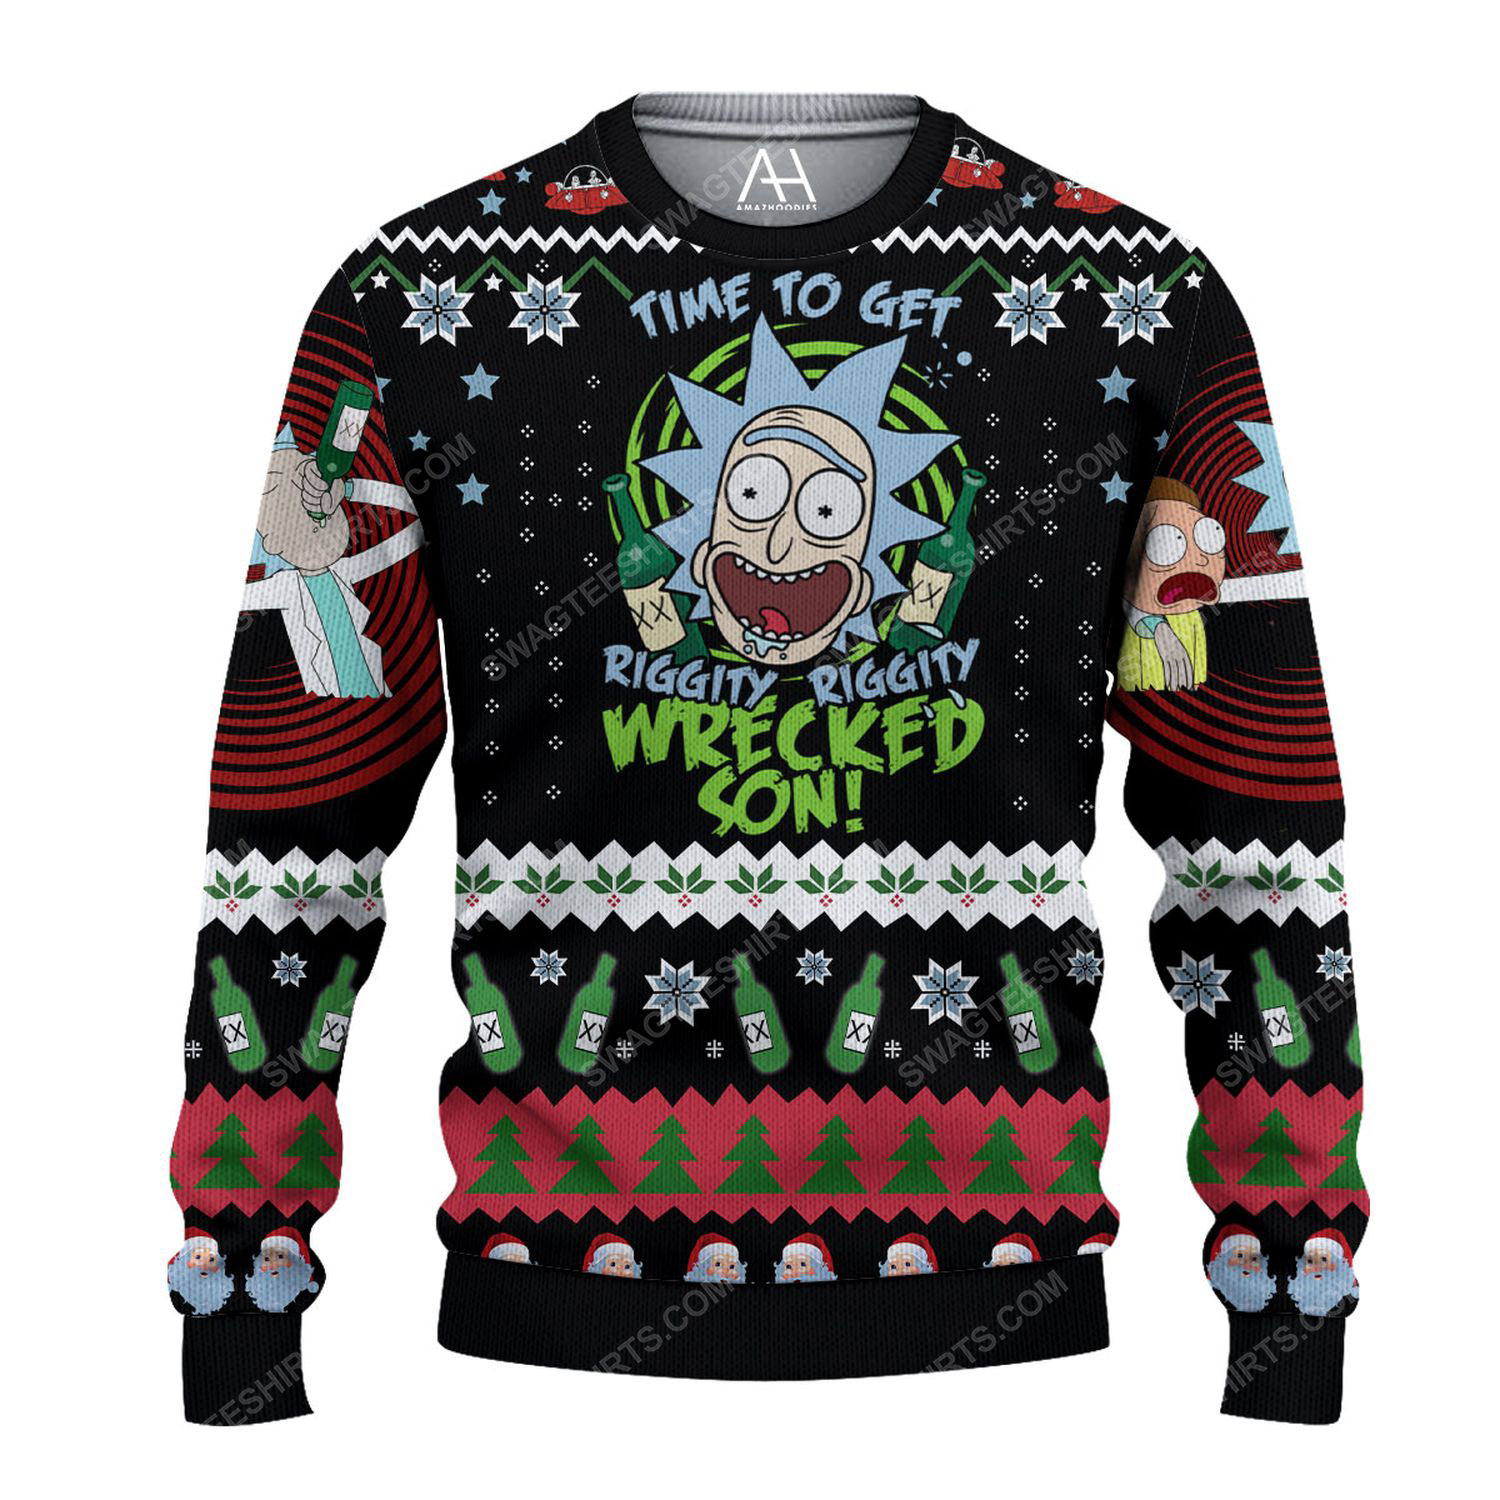 Rick and morty time to get schwifty ugly christmas sweater 1 - Copy (3)